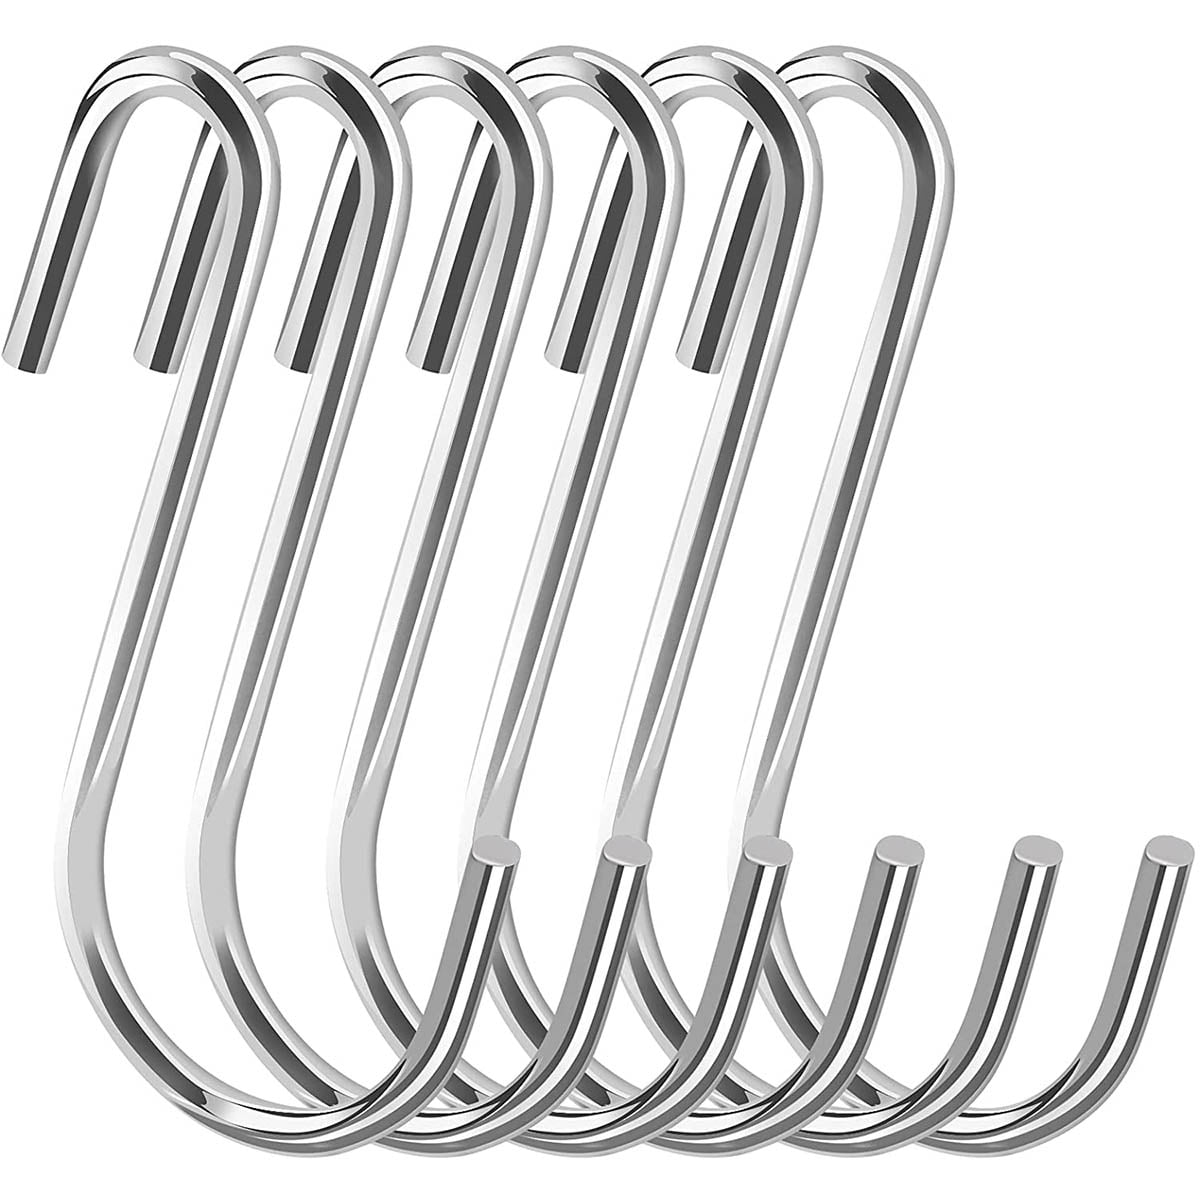 Outdoor LARGE/12 Pack 304 Stainless Steel S Shaped Hook Hanging Hangers for Kitchen Office Bathroom Flat S Hooks Heavy Duty with Upgrade Head